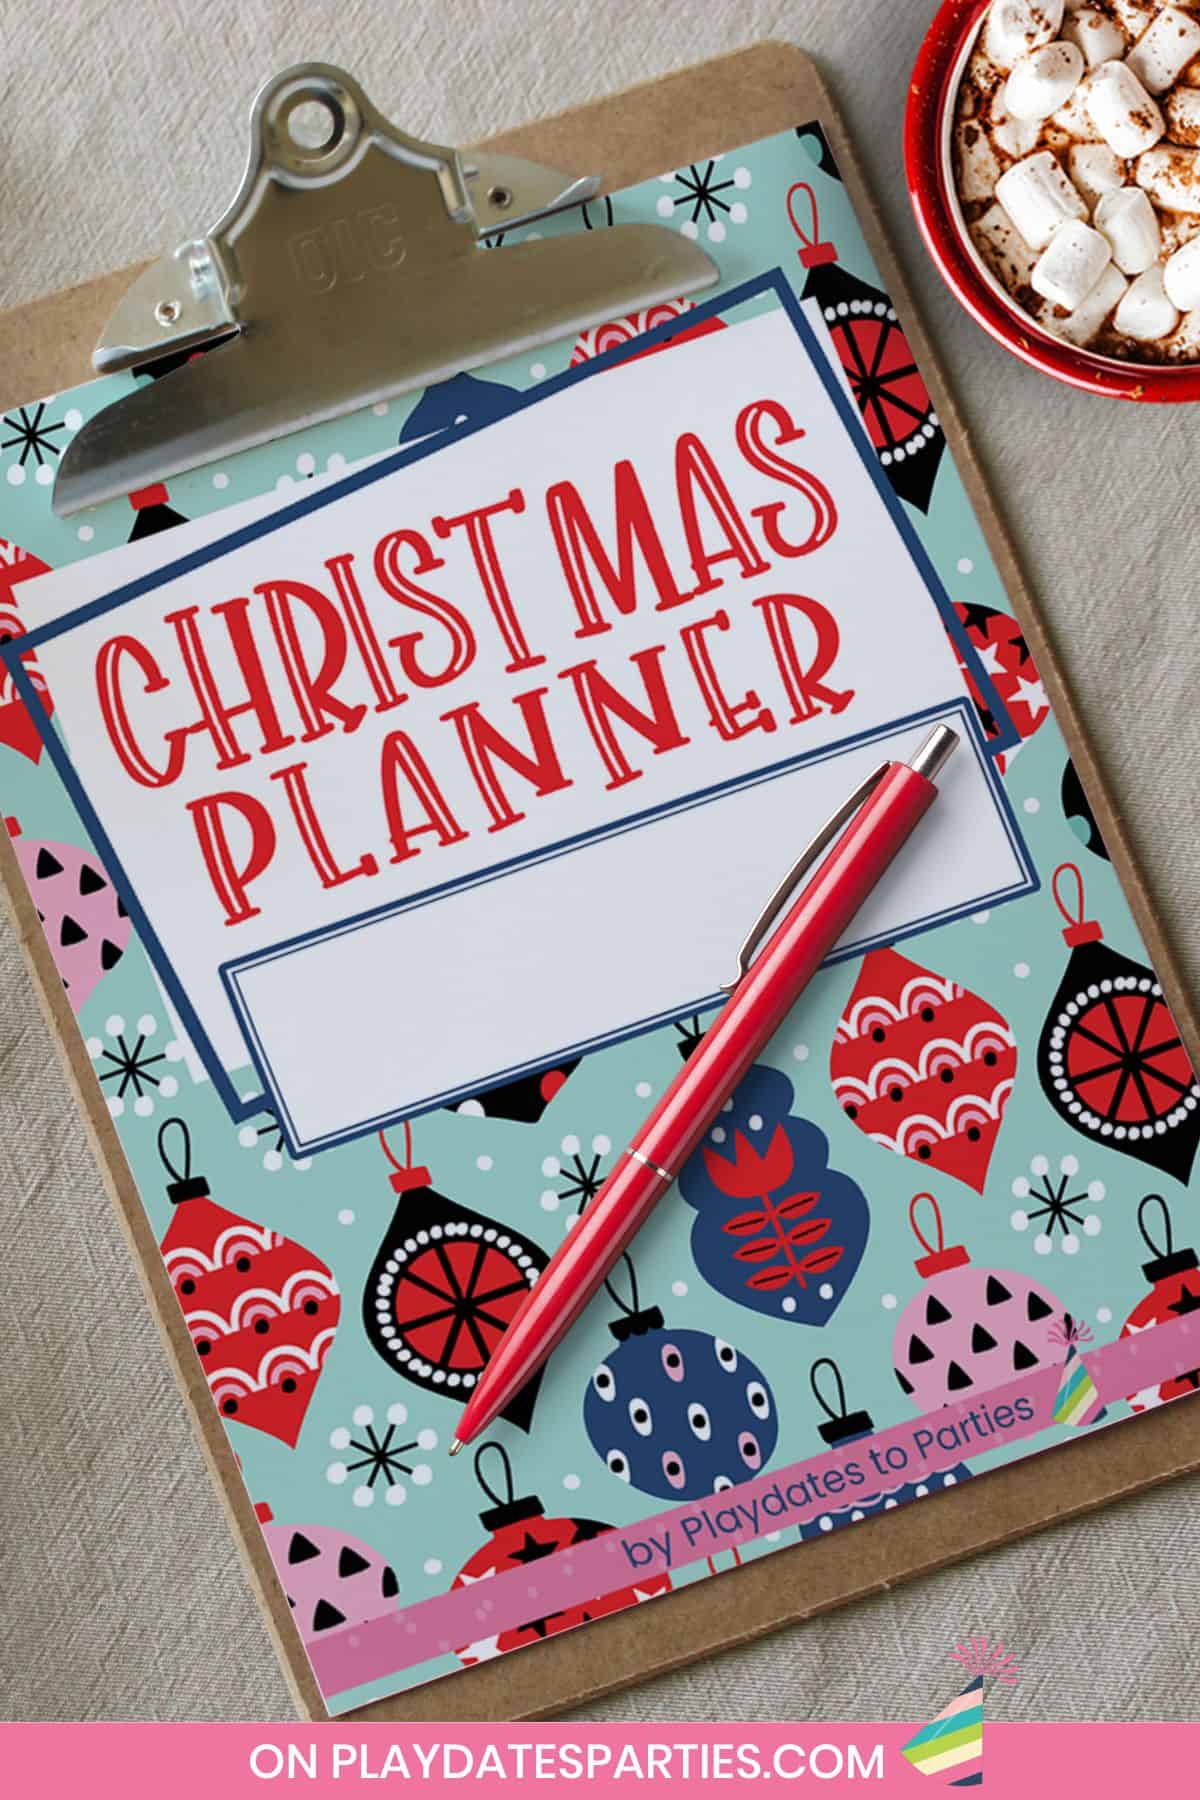 Printed Christmas planner on a clipboard.